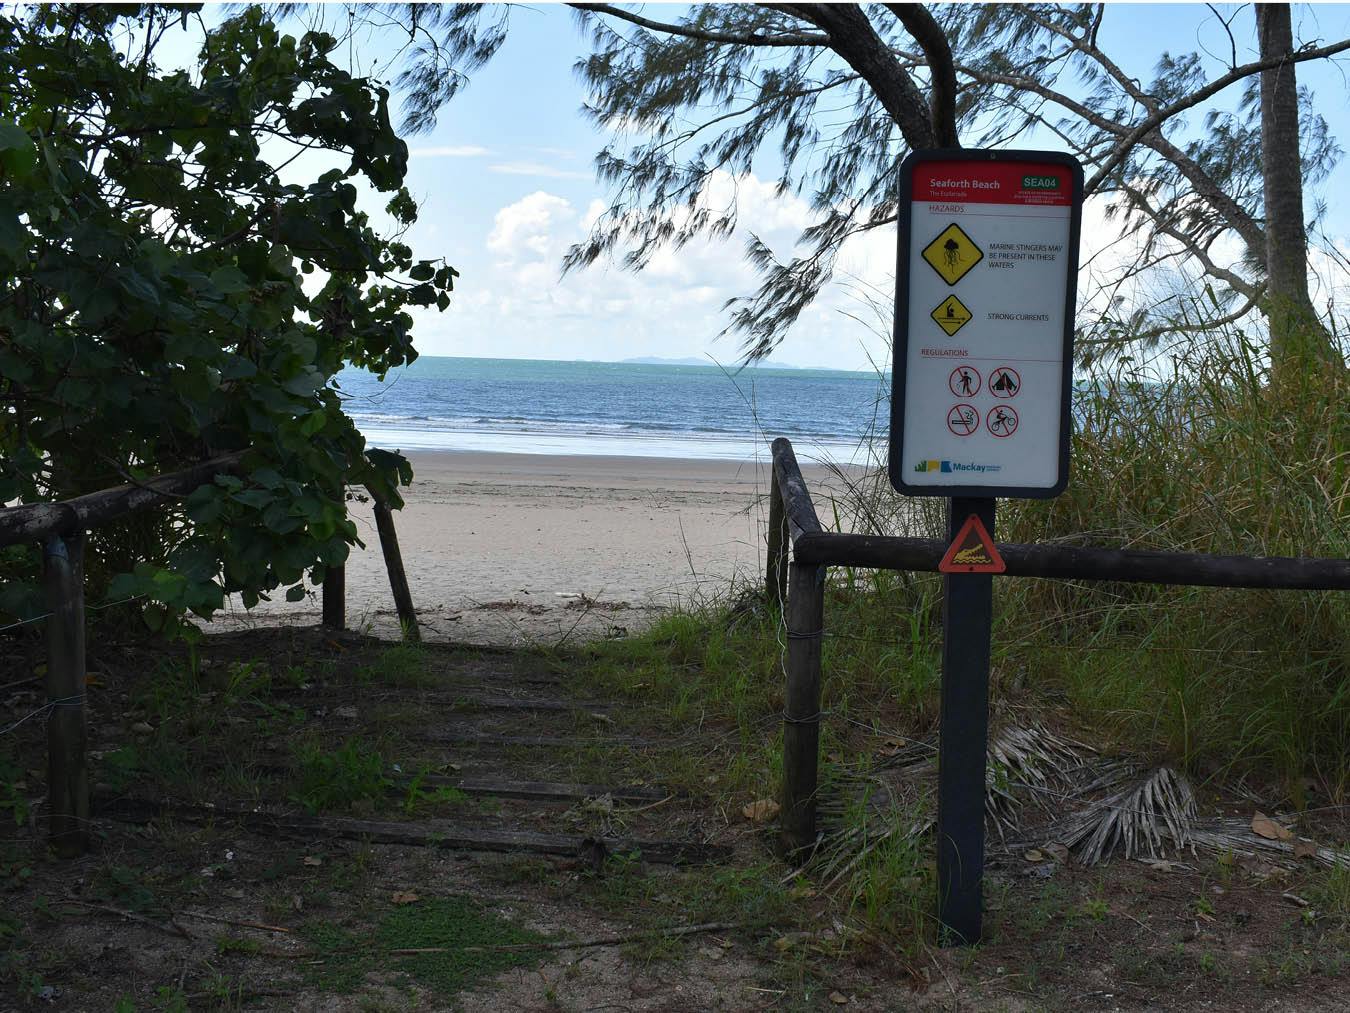 This photograph is of the beach access on the western side of the post and rail fence defines the picnic area which services the swimming enclosure.